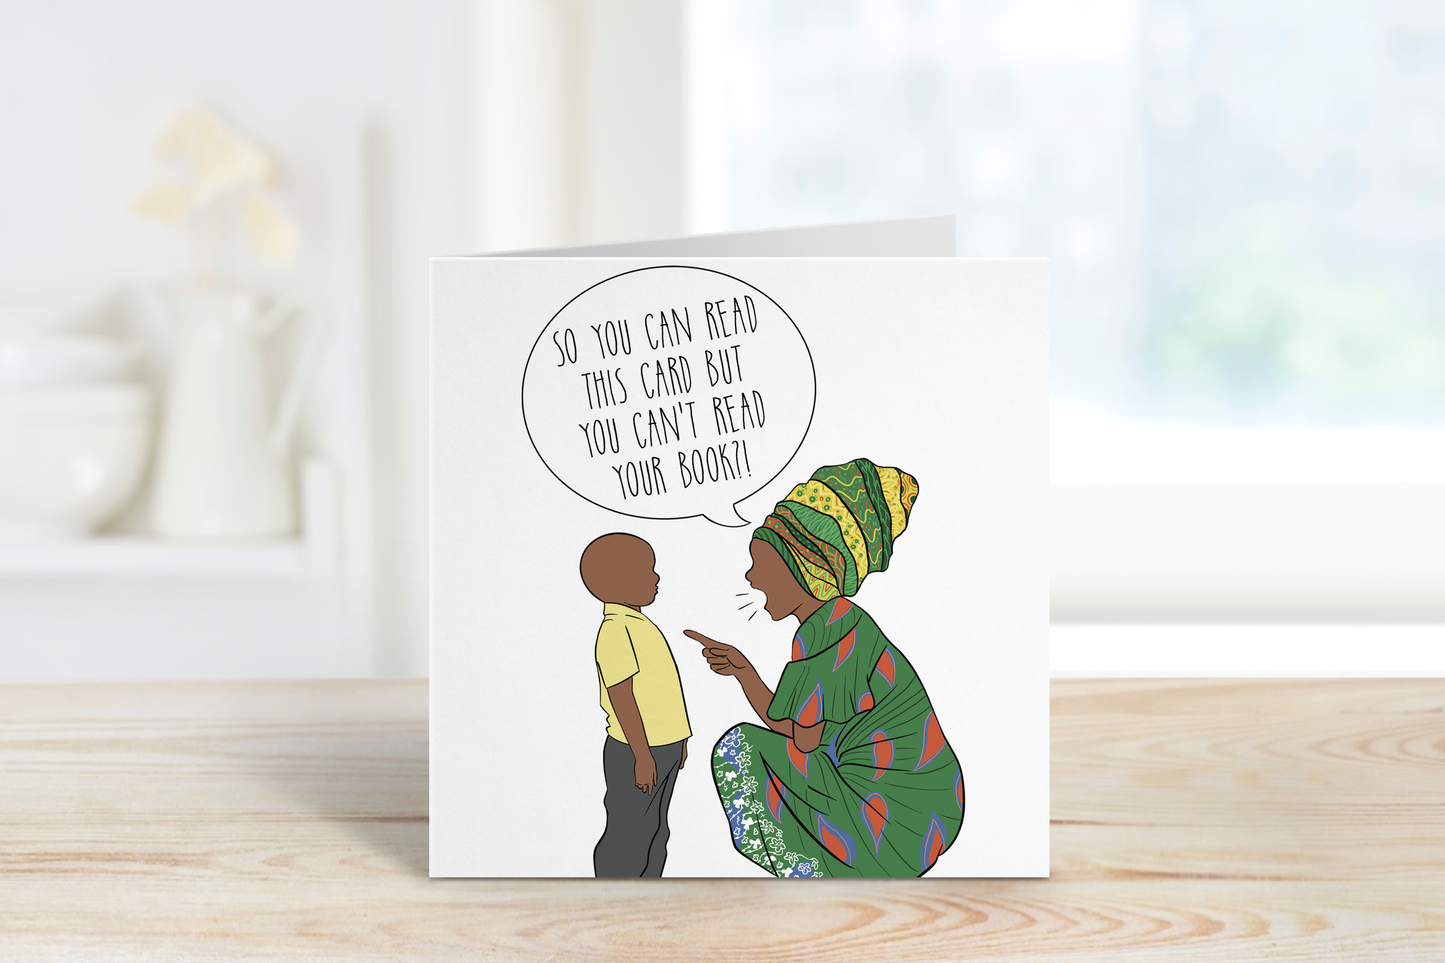 'So You Can Read This Card But You Can't Read Your Book' Greeting Card